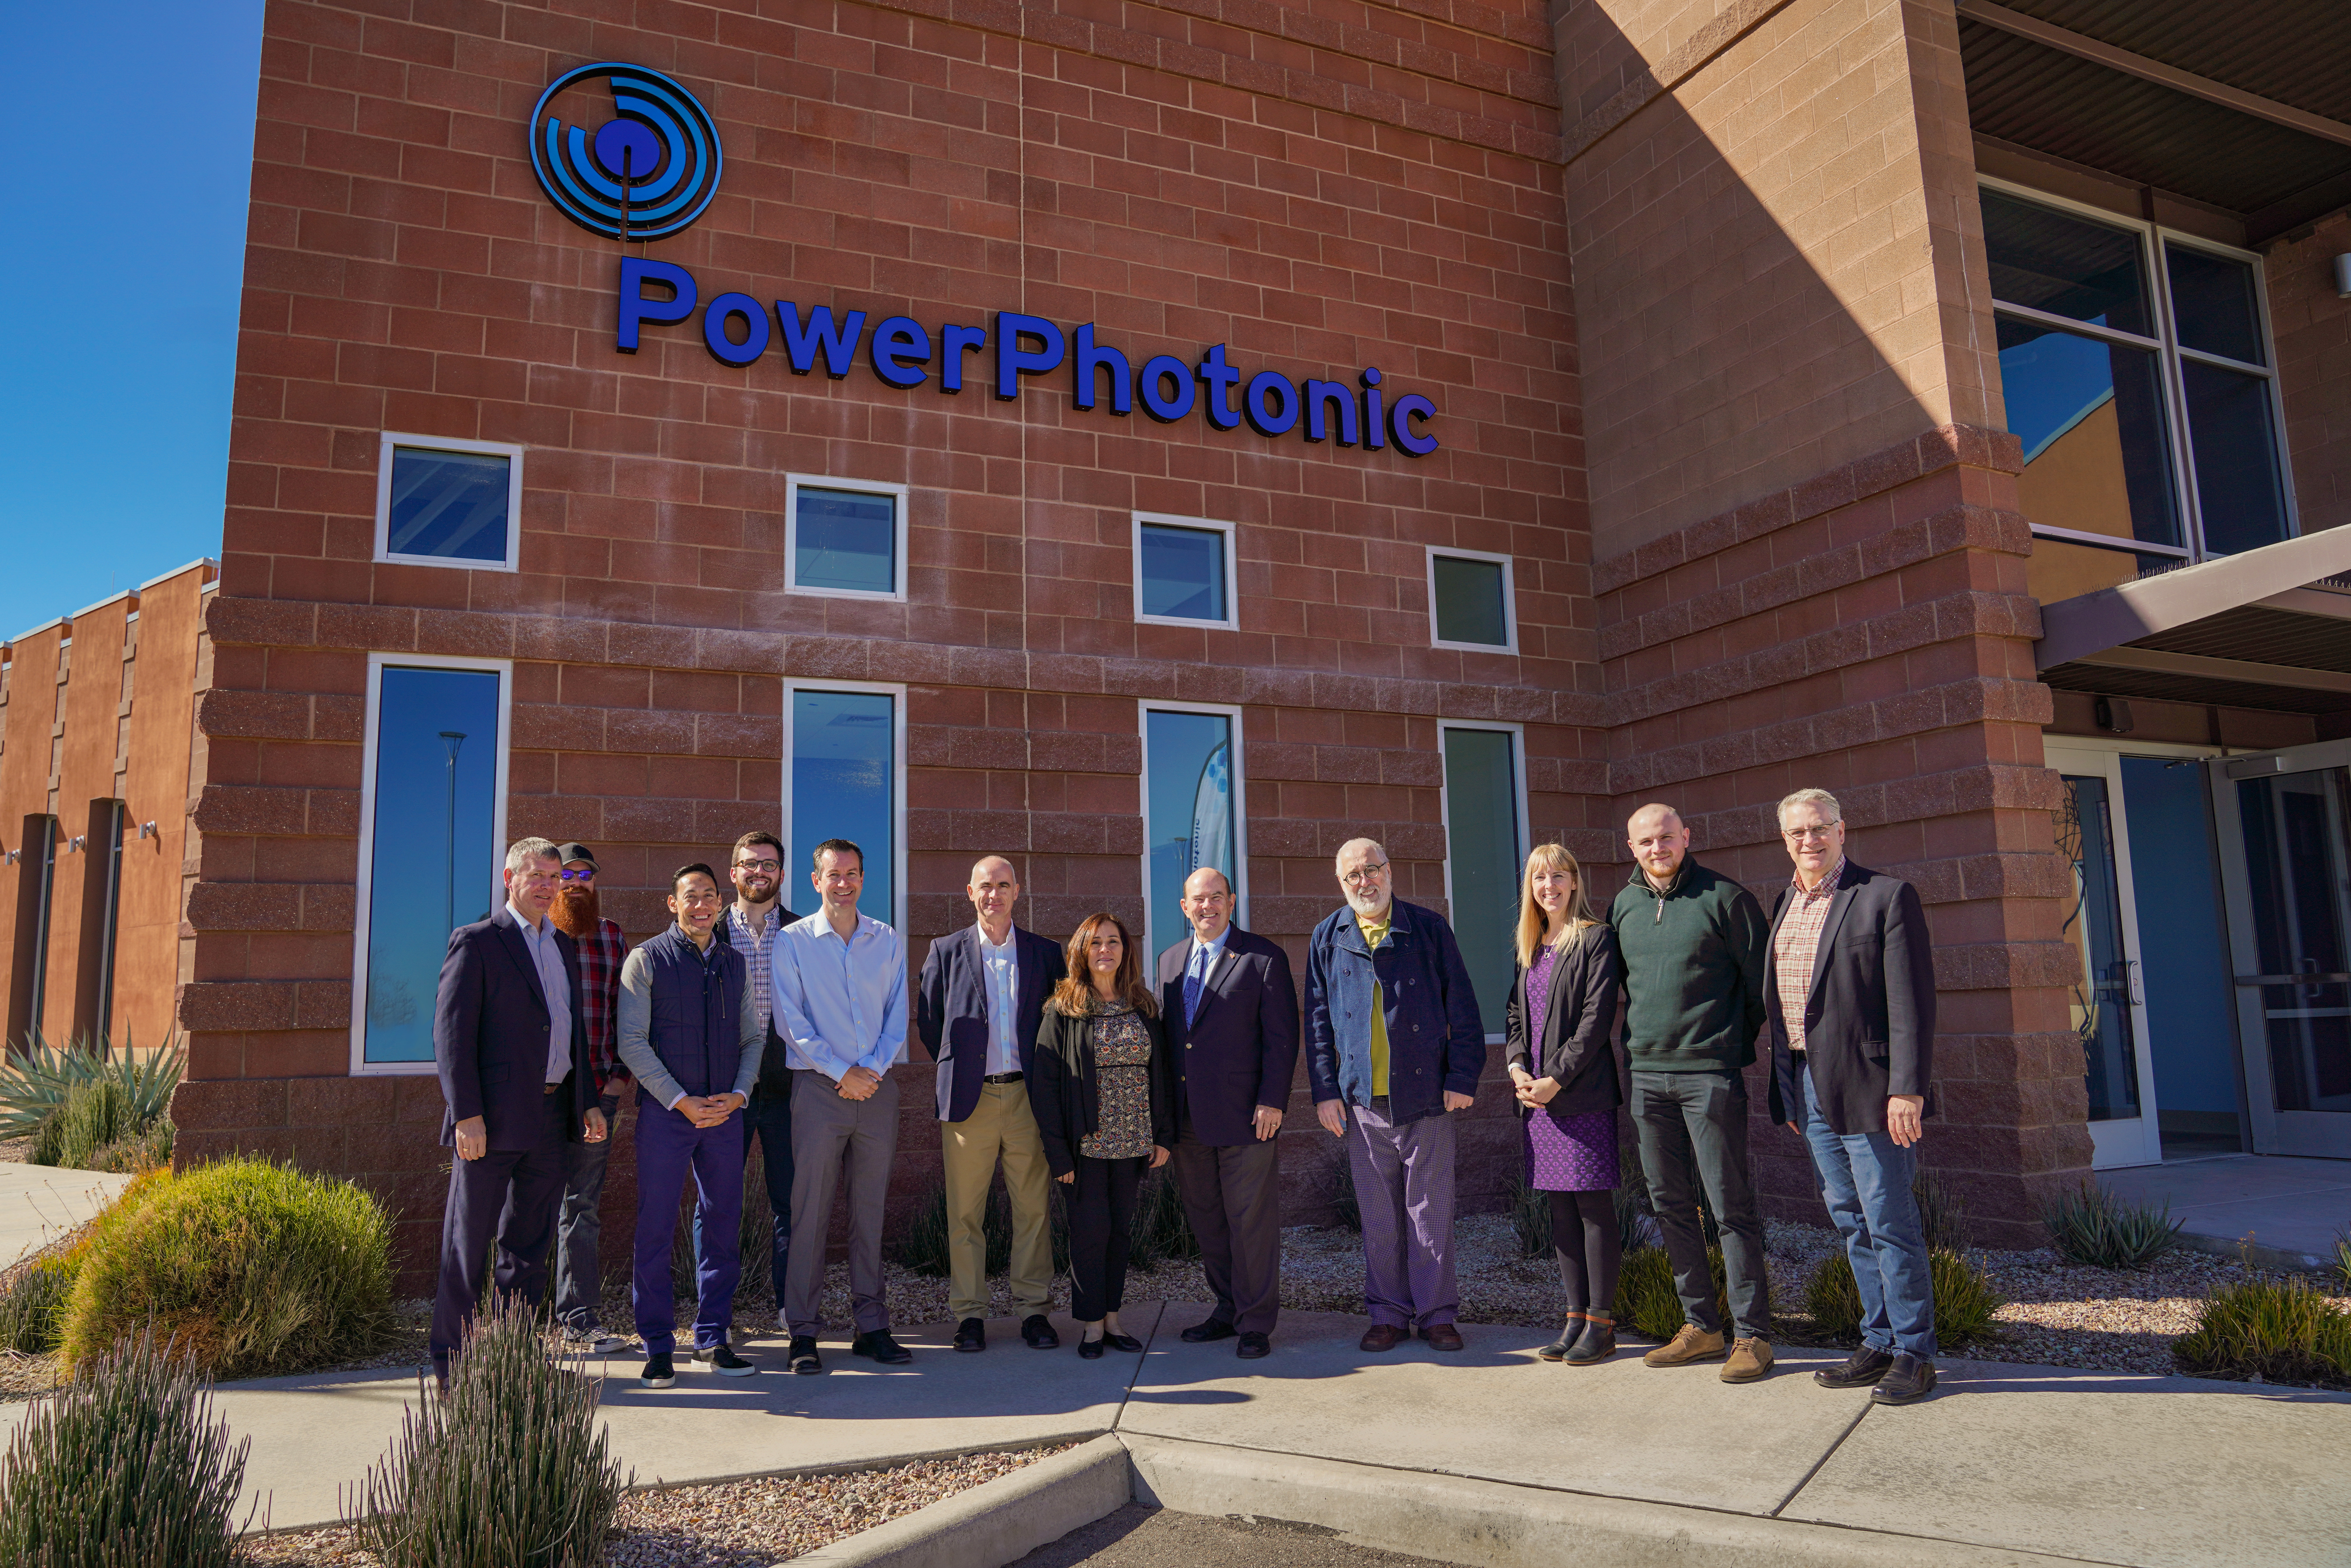 PowerPhotonic celebrates the unofficial opening of its new, US manufacturing facility, with Sahuarita mayor and exclusive guests.